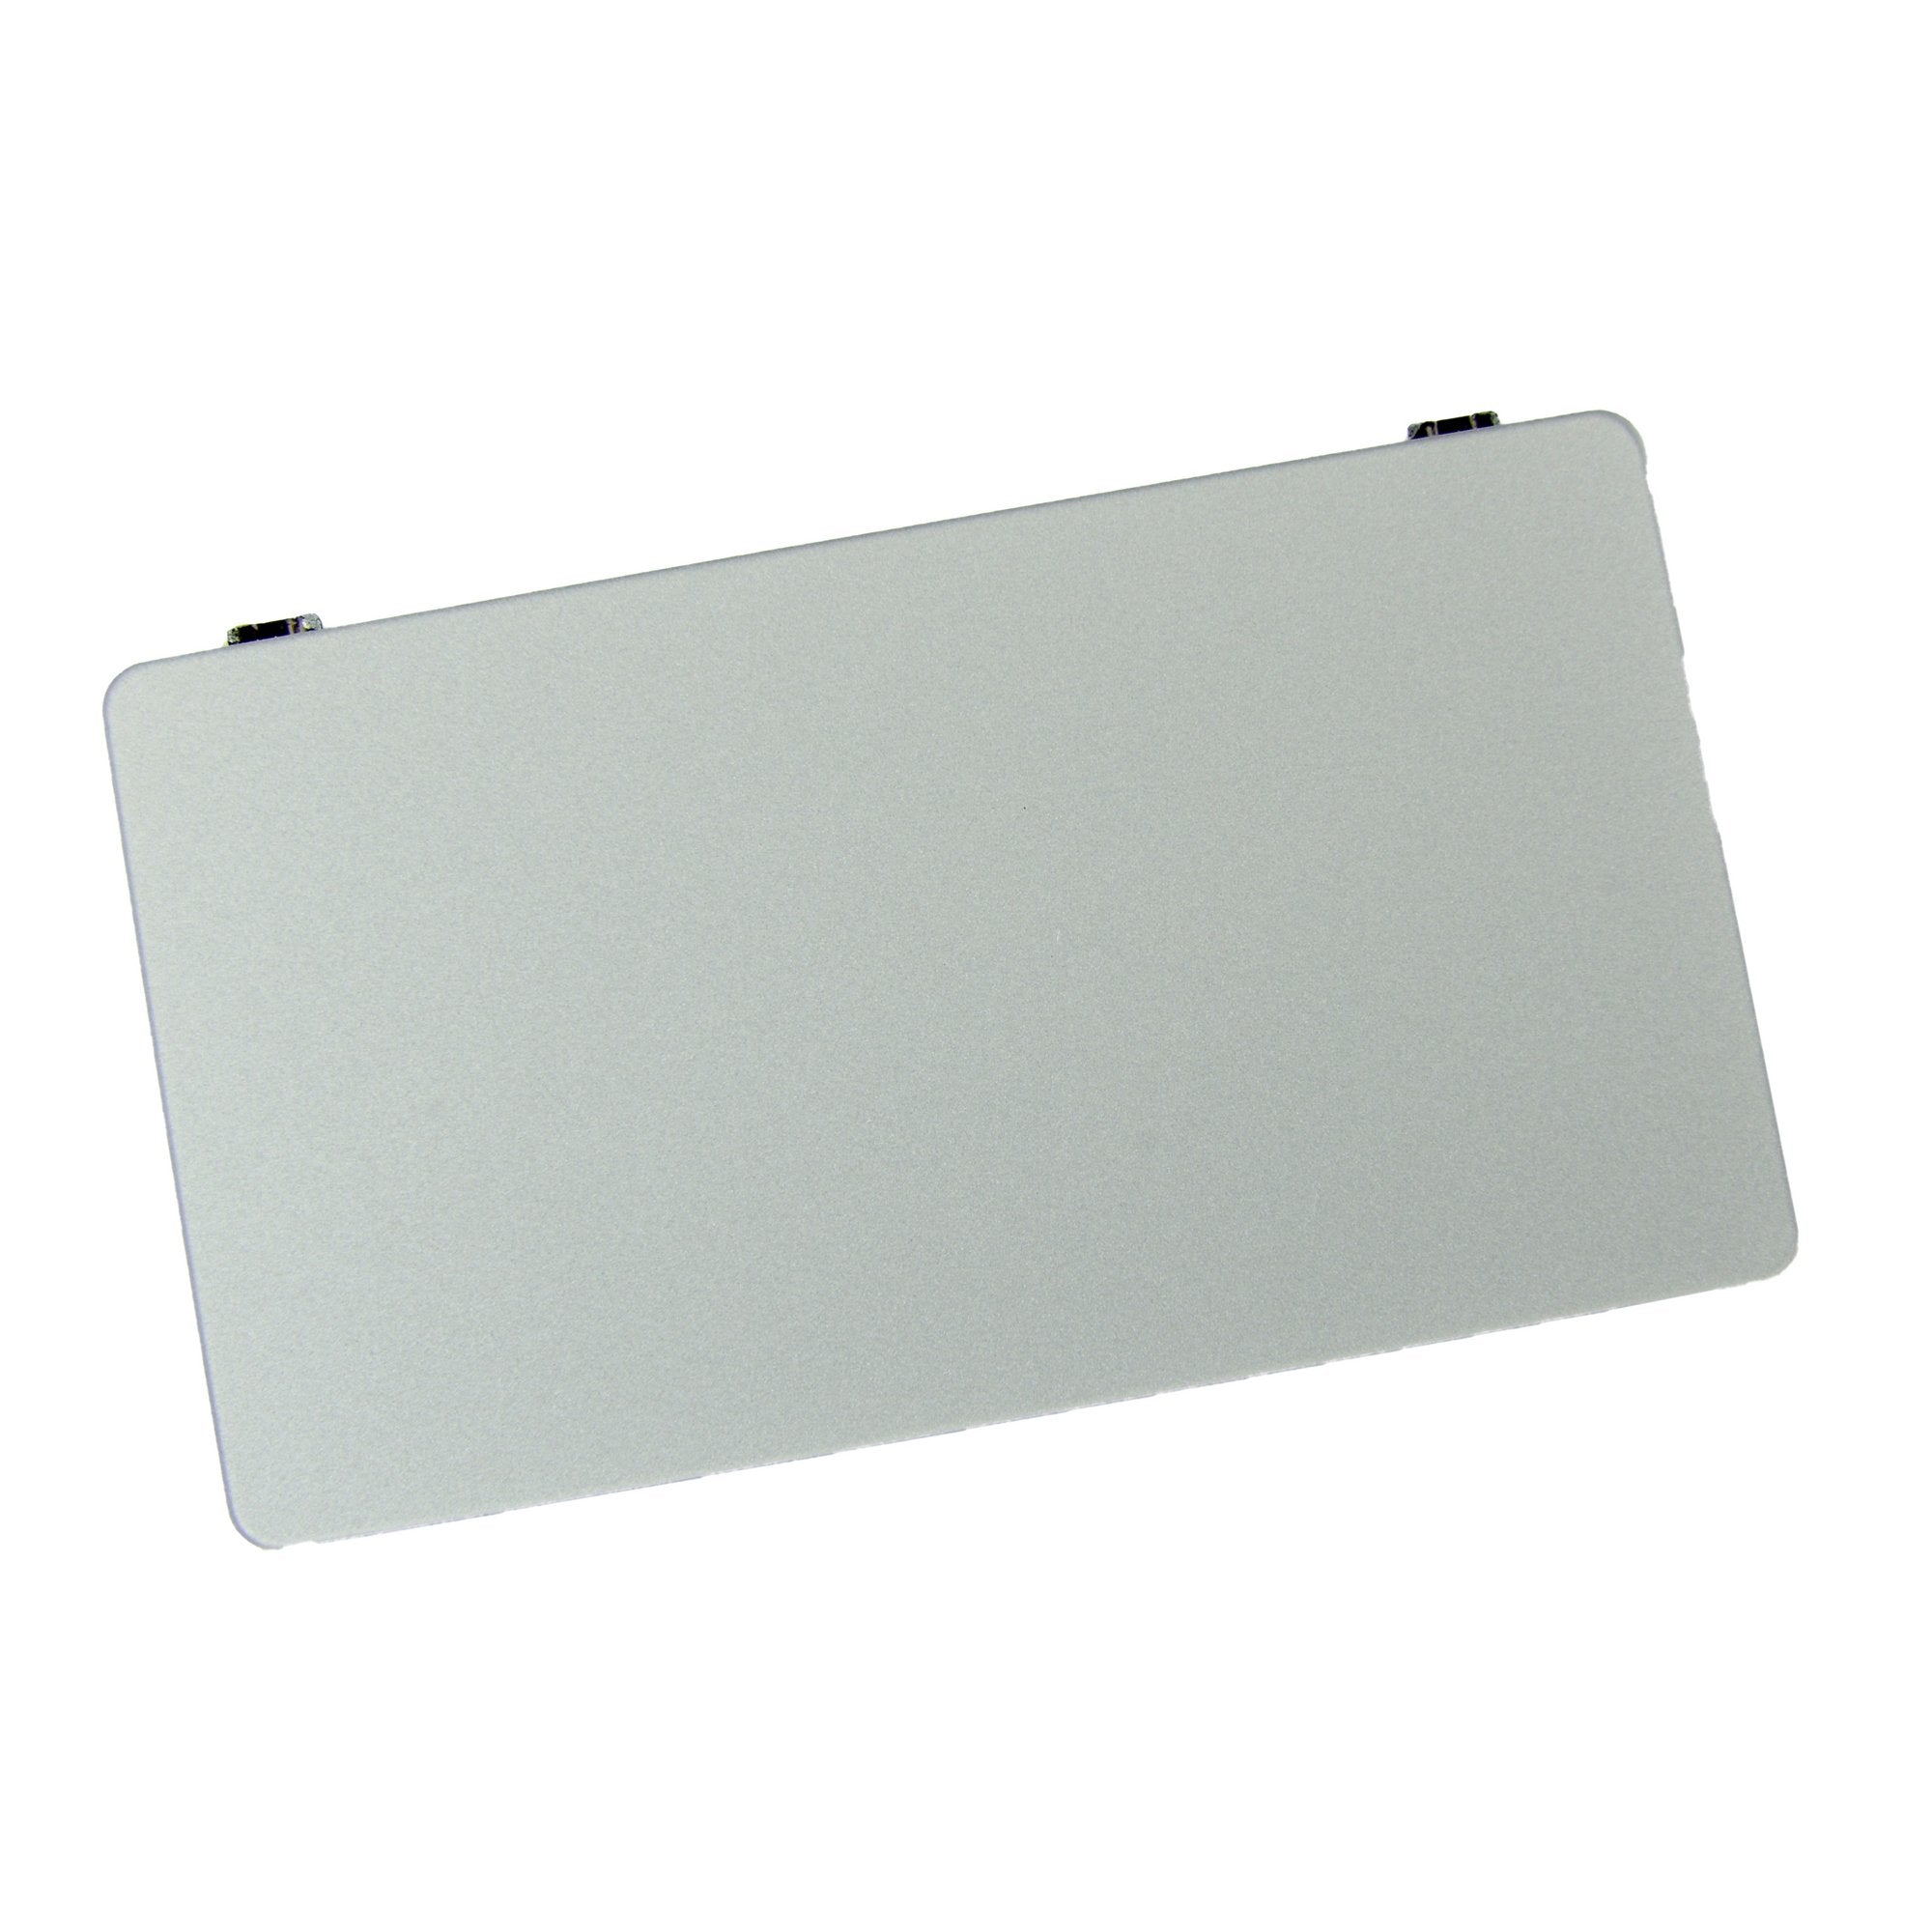 HP Chromebook 11 G3/G4 Touchpad